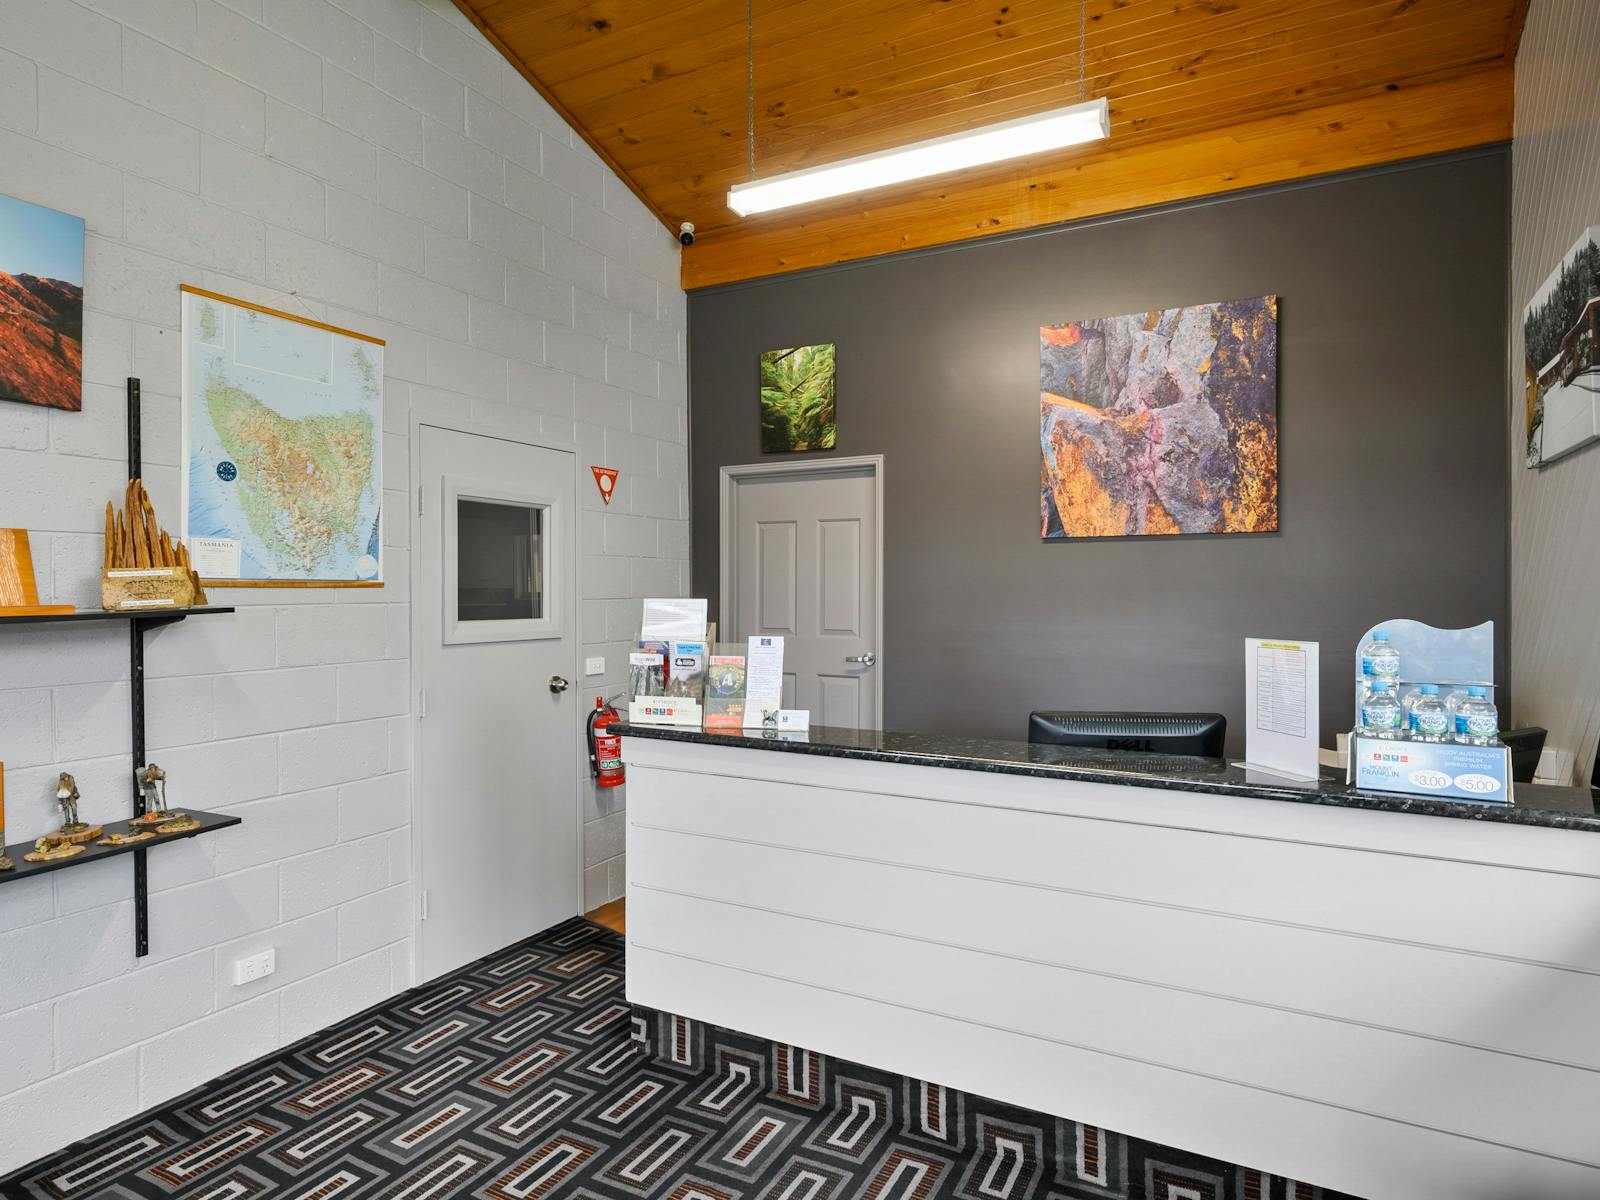 Motel Reception is located at motel entry with easy access, tastefully decorated with local artwork